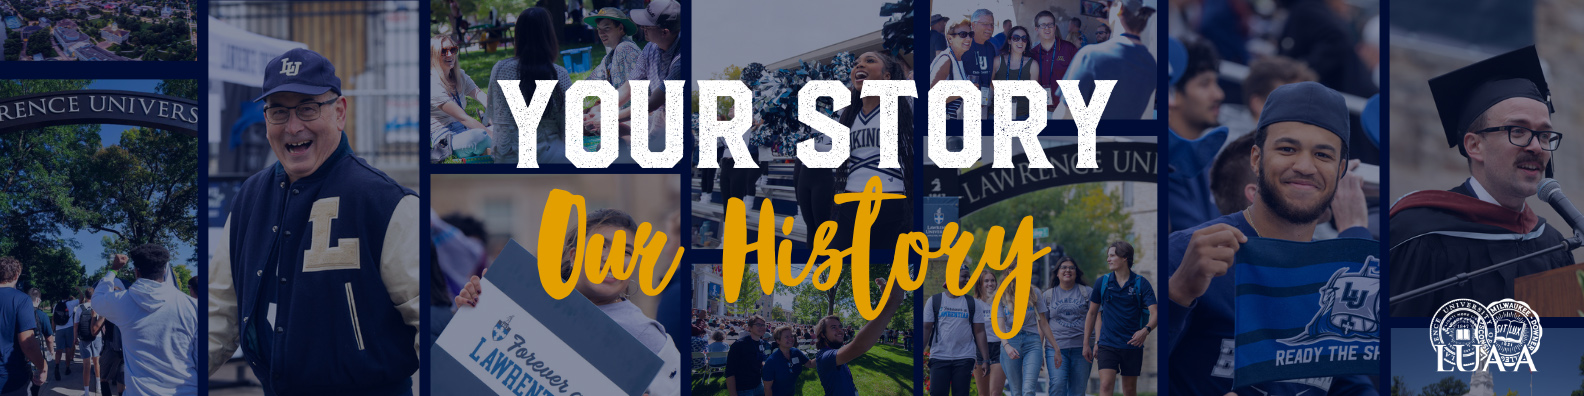 LUAA Share Your Story - Our History text over pictures of students and alumni